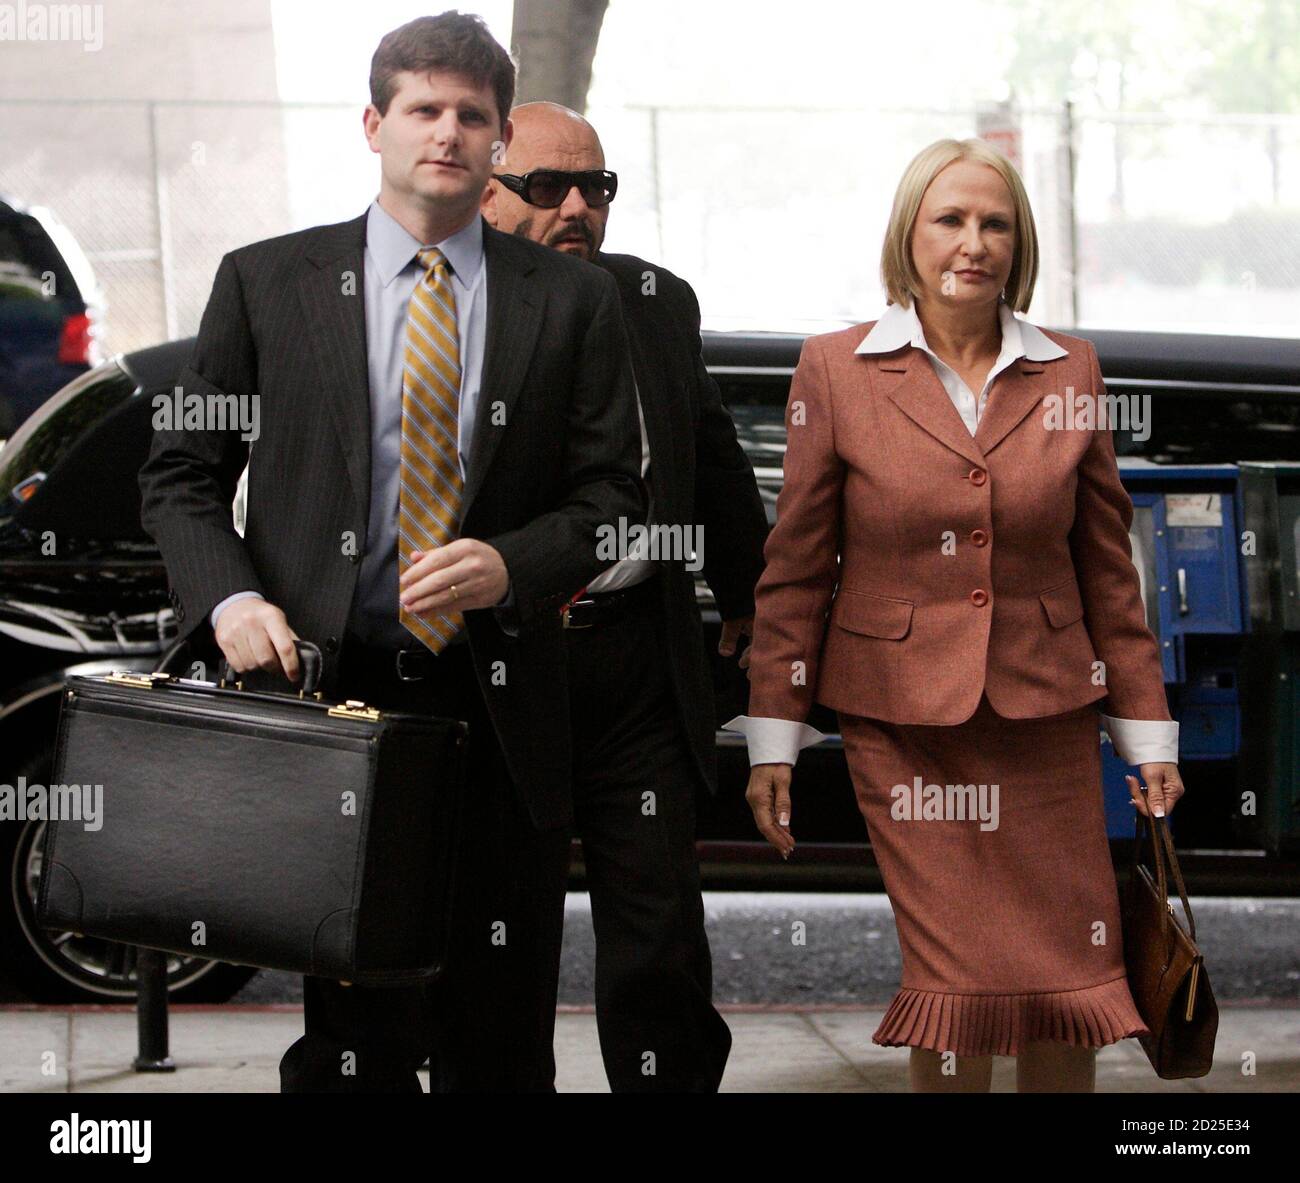 Defendant Khristine Eroshevich (R), a psychiatrist of late entertainment celebrity Anna Nicole Smith, arrives at the Los Angeles County Criminal Courts building for her arraignment in Los Angeles, California, May 13, 2009. The longtime companion of Anna Nicole Smith and two psychiatrists were charged on Thursday with conspiring to furnish drugs to the former Playboy playmate in the years before her 2007 death from a prescription medication overdose.   REUTERS/Danny Moloshok (UNITED STATES) Stock Photo